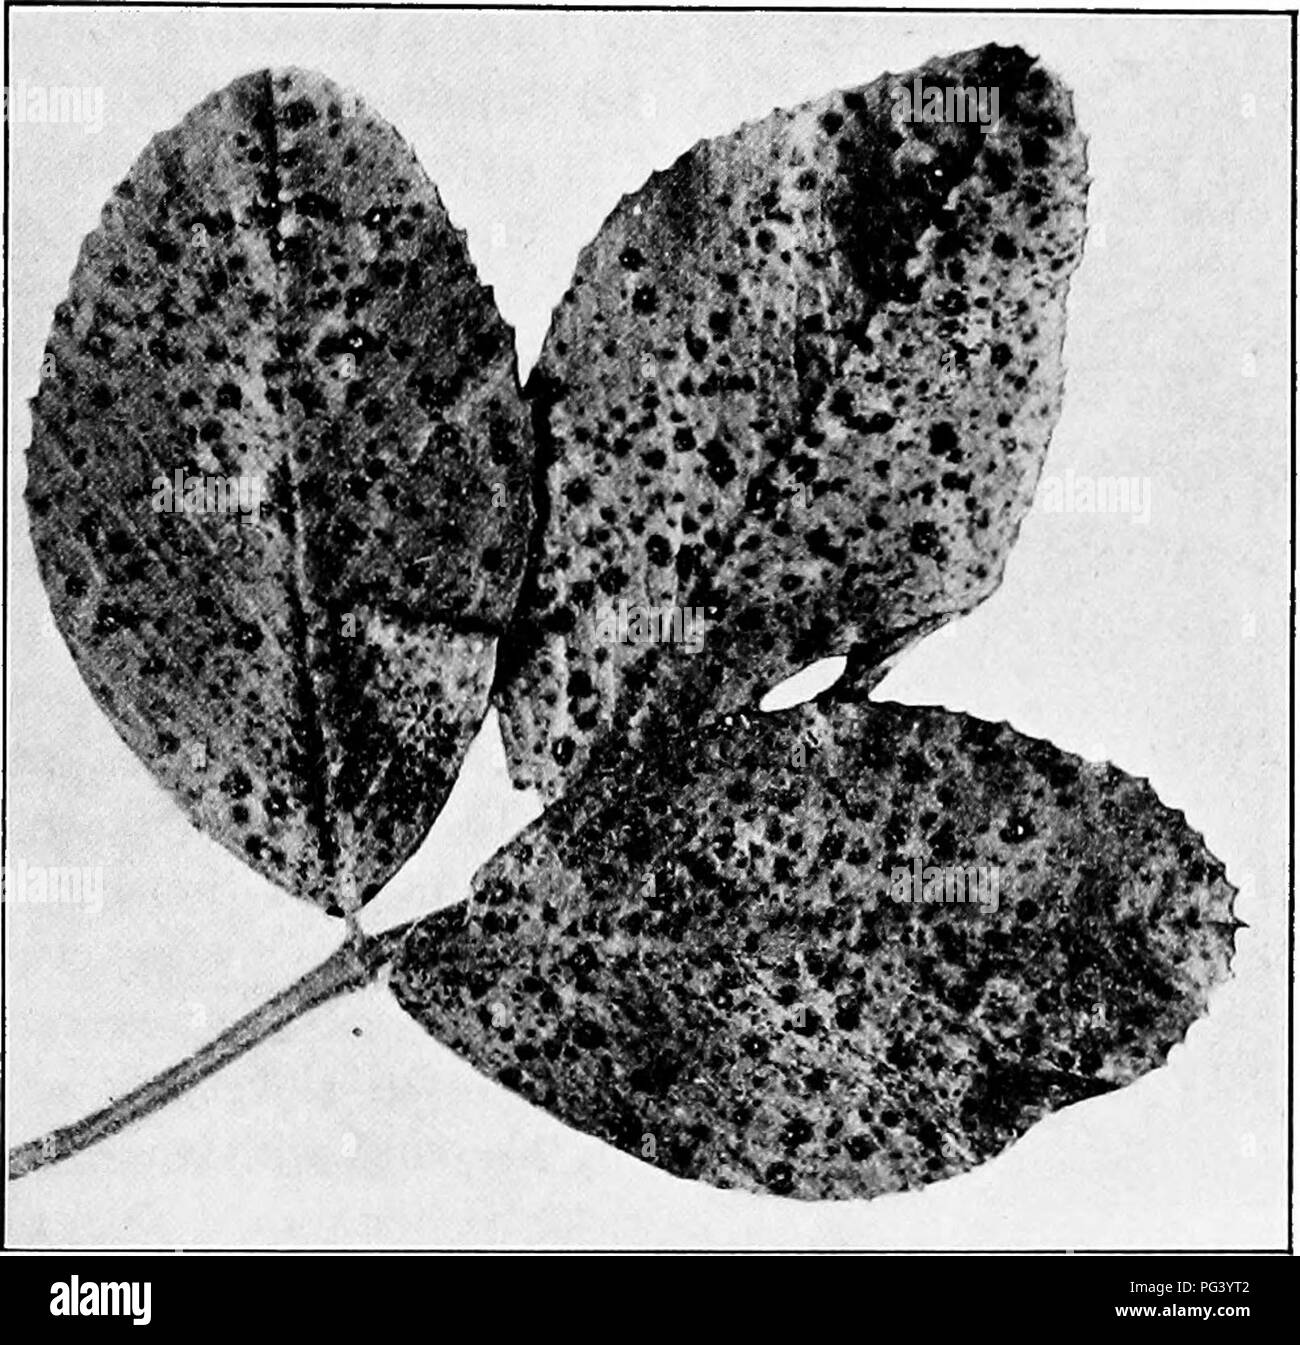 . Fungous diseases of plants : with chapters on physiology, culture methods and technique . Fungi in agriculture. ASCOMYCETES 203 XII. MOLLISIACE^E This family differs from the Helotiaceae largely in texture, the former being tougher, and as a rule made up of hyphal cells modified in a prosenchymatic or fibrous manner. The spores are hyaline and very similar to those of the Helotiacese. The only genus of importance in producing plant diseases is Pseudopeziza.. Fig. 77 a. Alfalfa Leaf Spot. (Photograph by H. H. Whetzel) Pseudopeziza. In this genus the apothecium is formed beneath the epidermis, Stock Photo